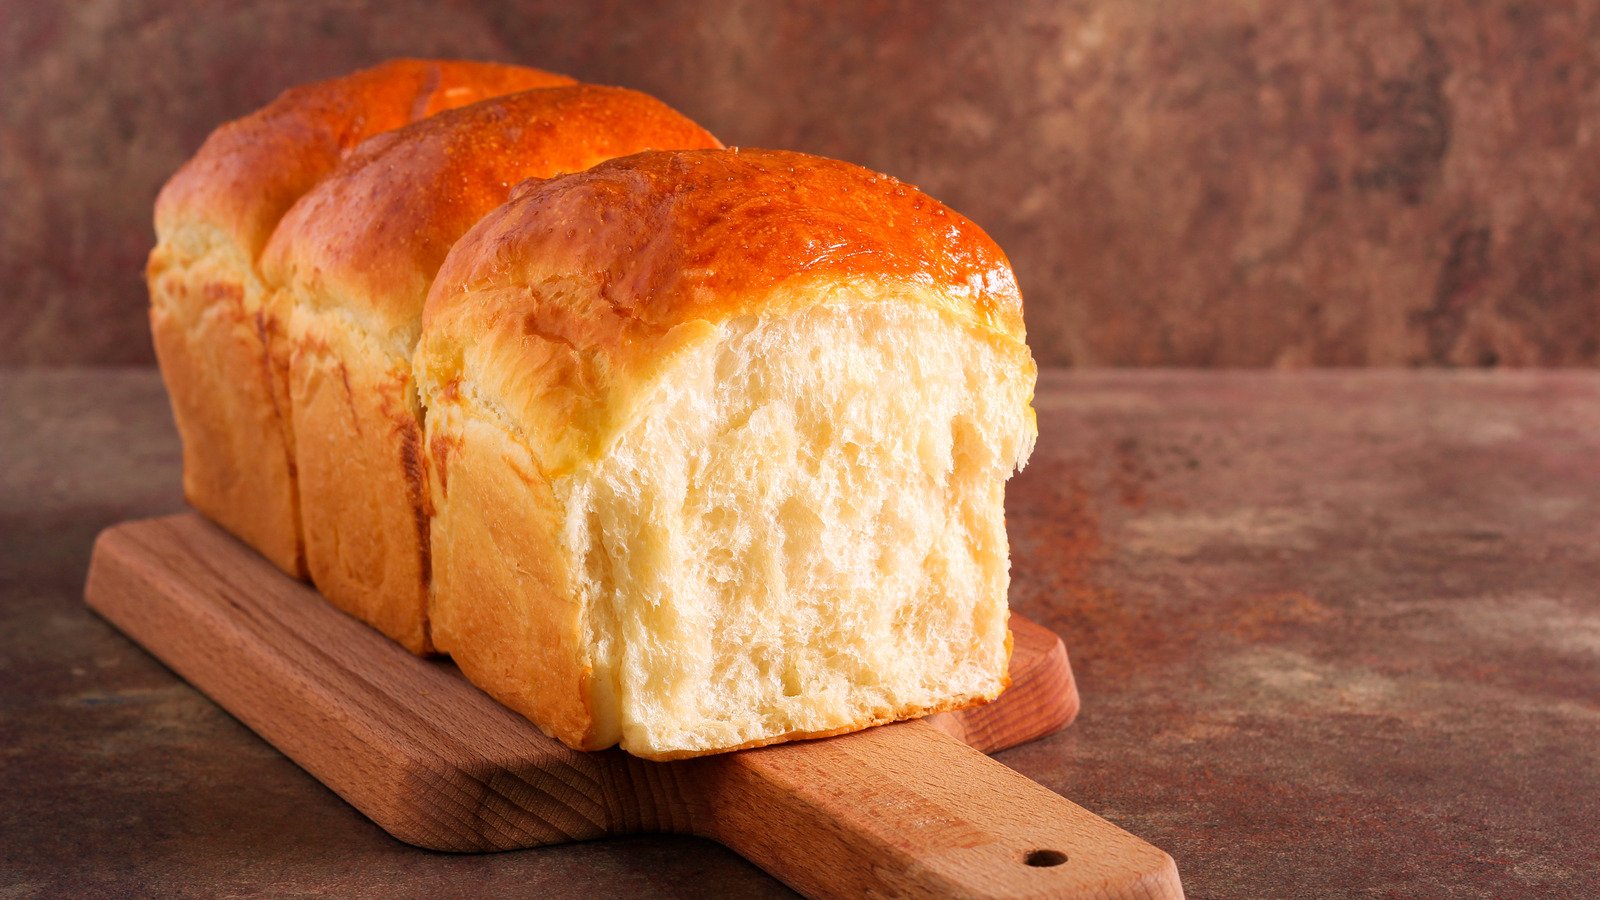 The Amish Hack That Will Change How You Make Homemade Bread - Mashed